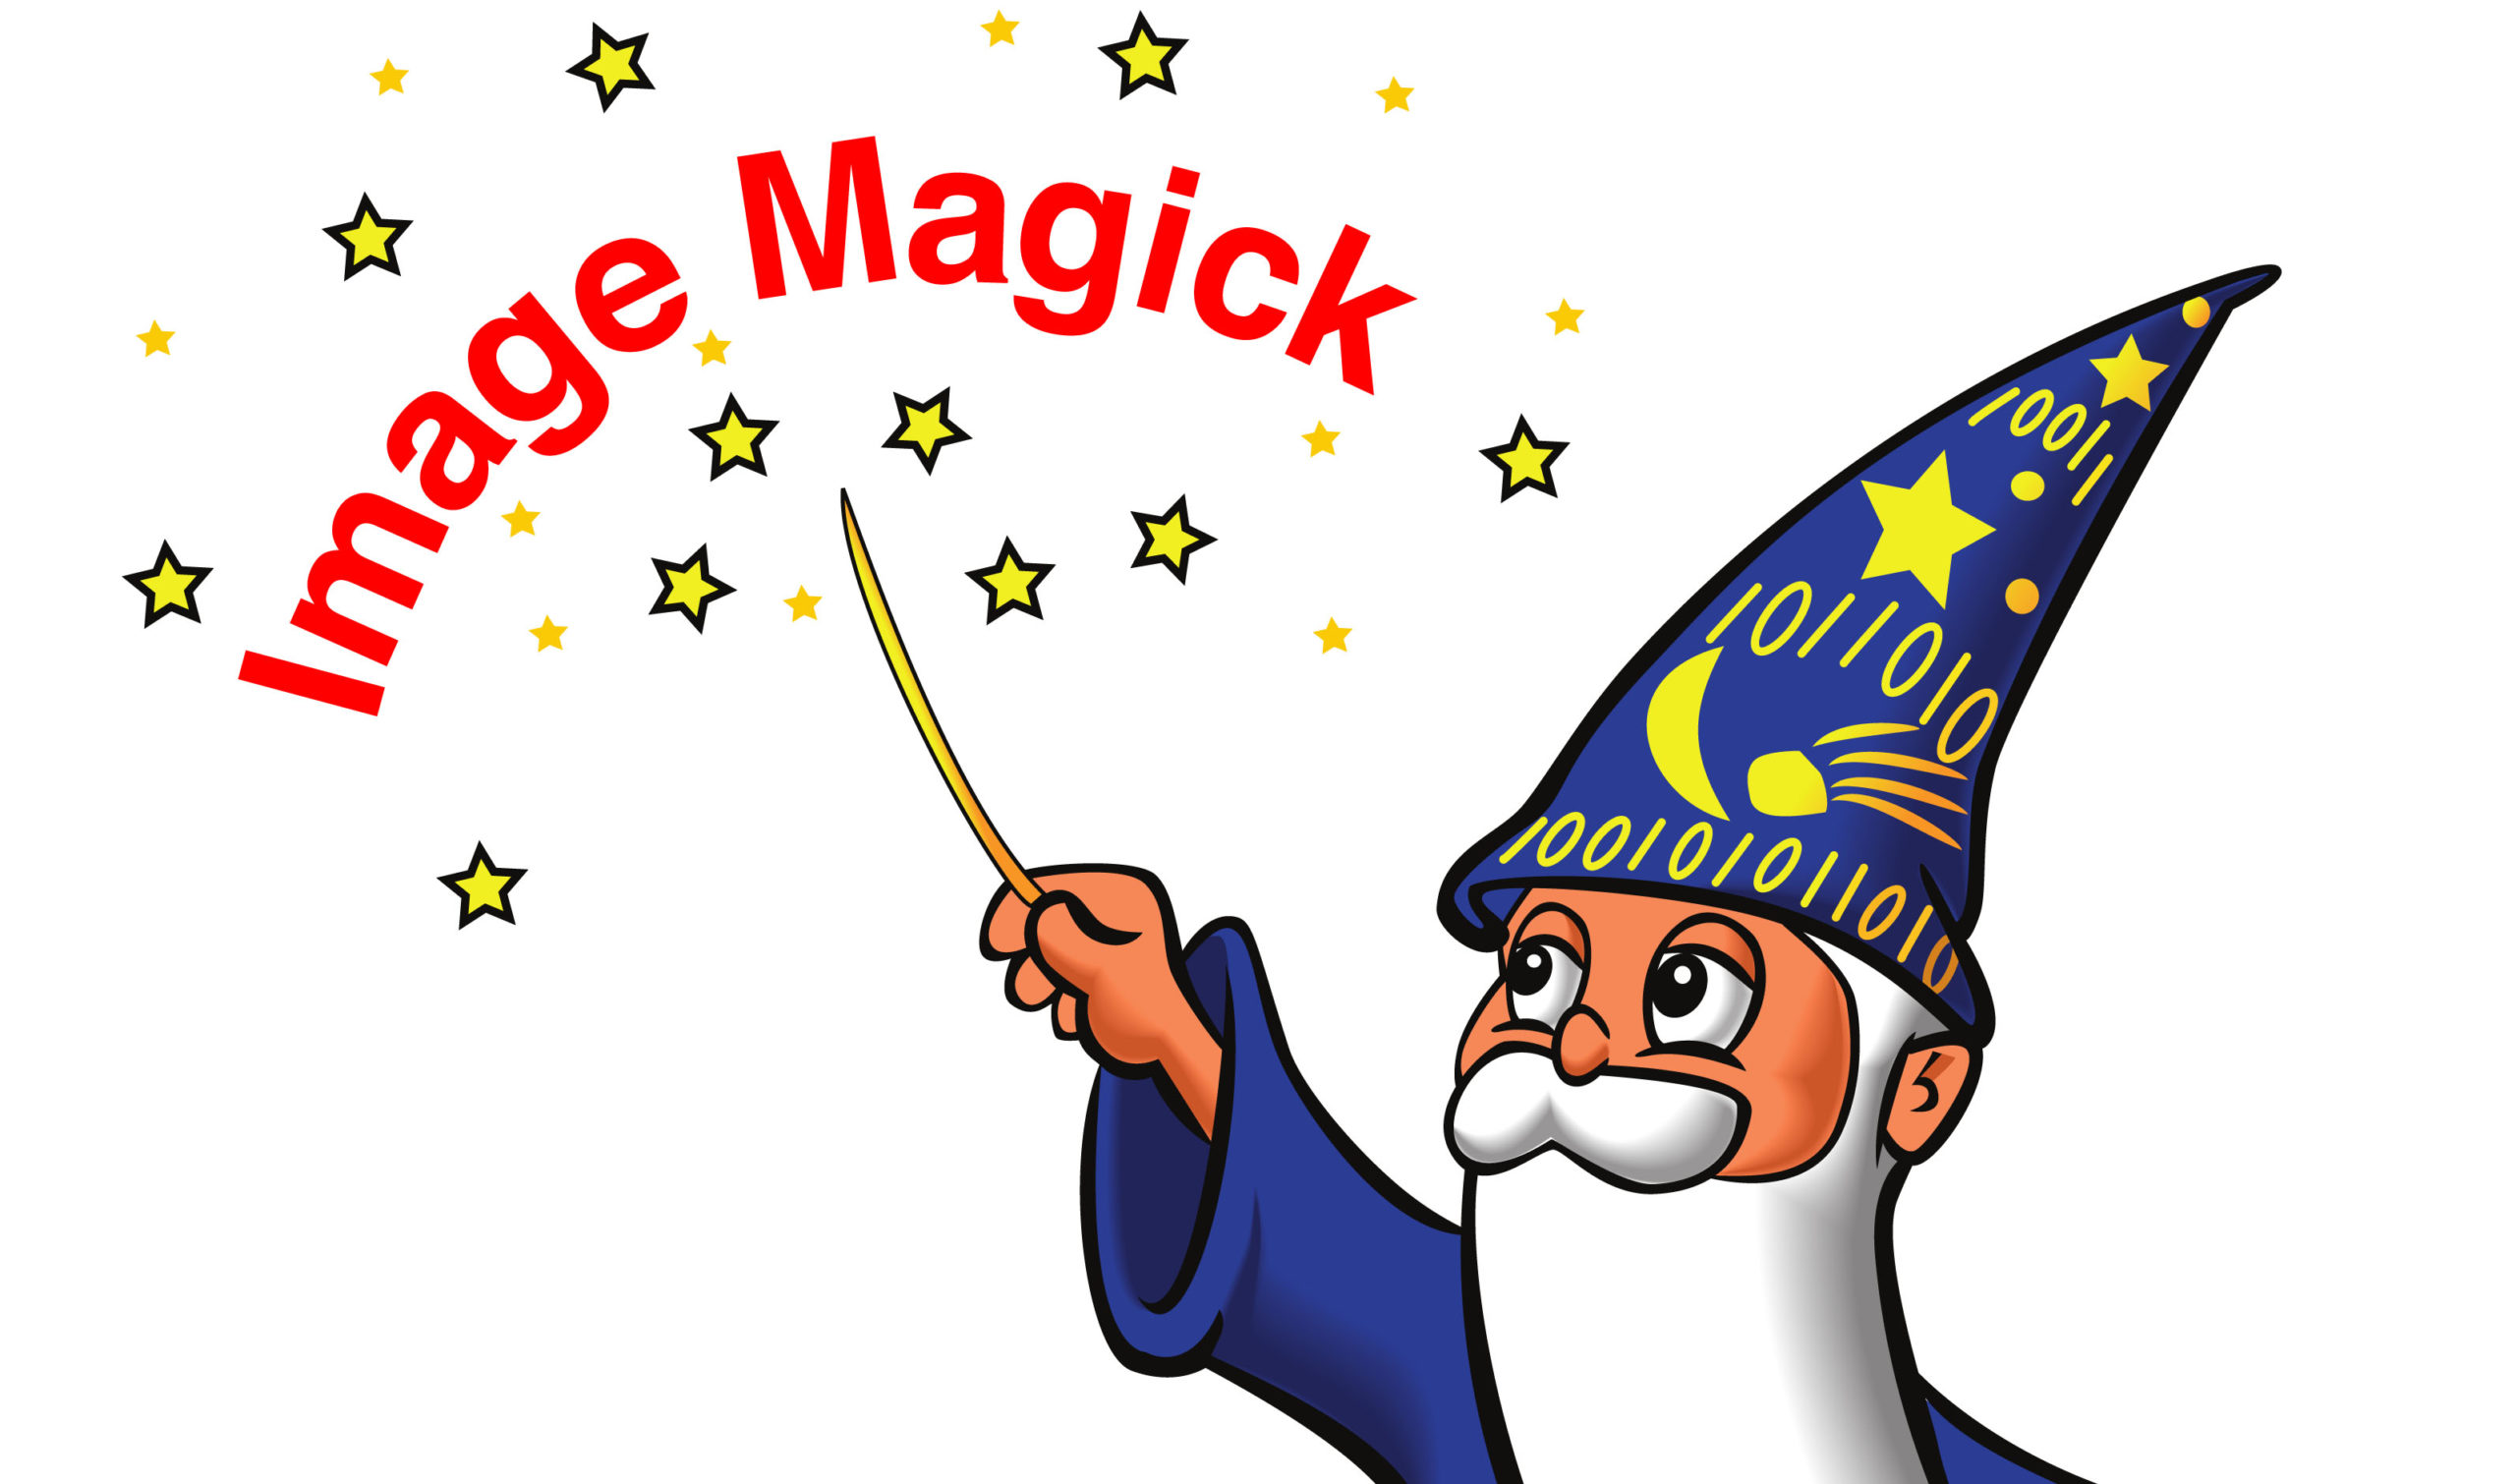 A cartoon wizard with a pointy hat and long beard, pointing a magic wand at the words "Image Magick"